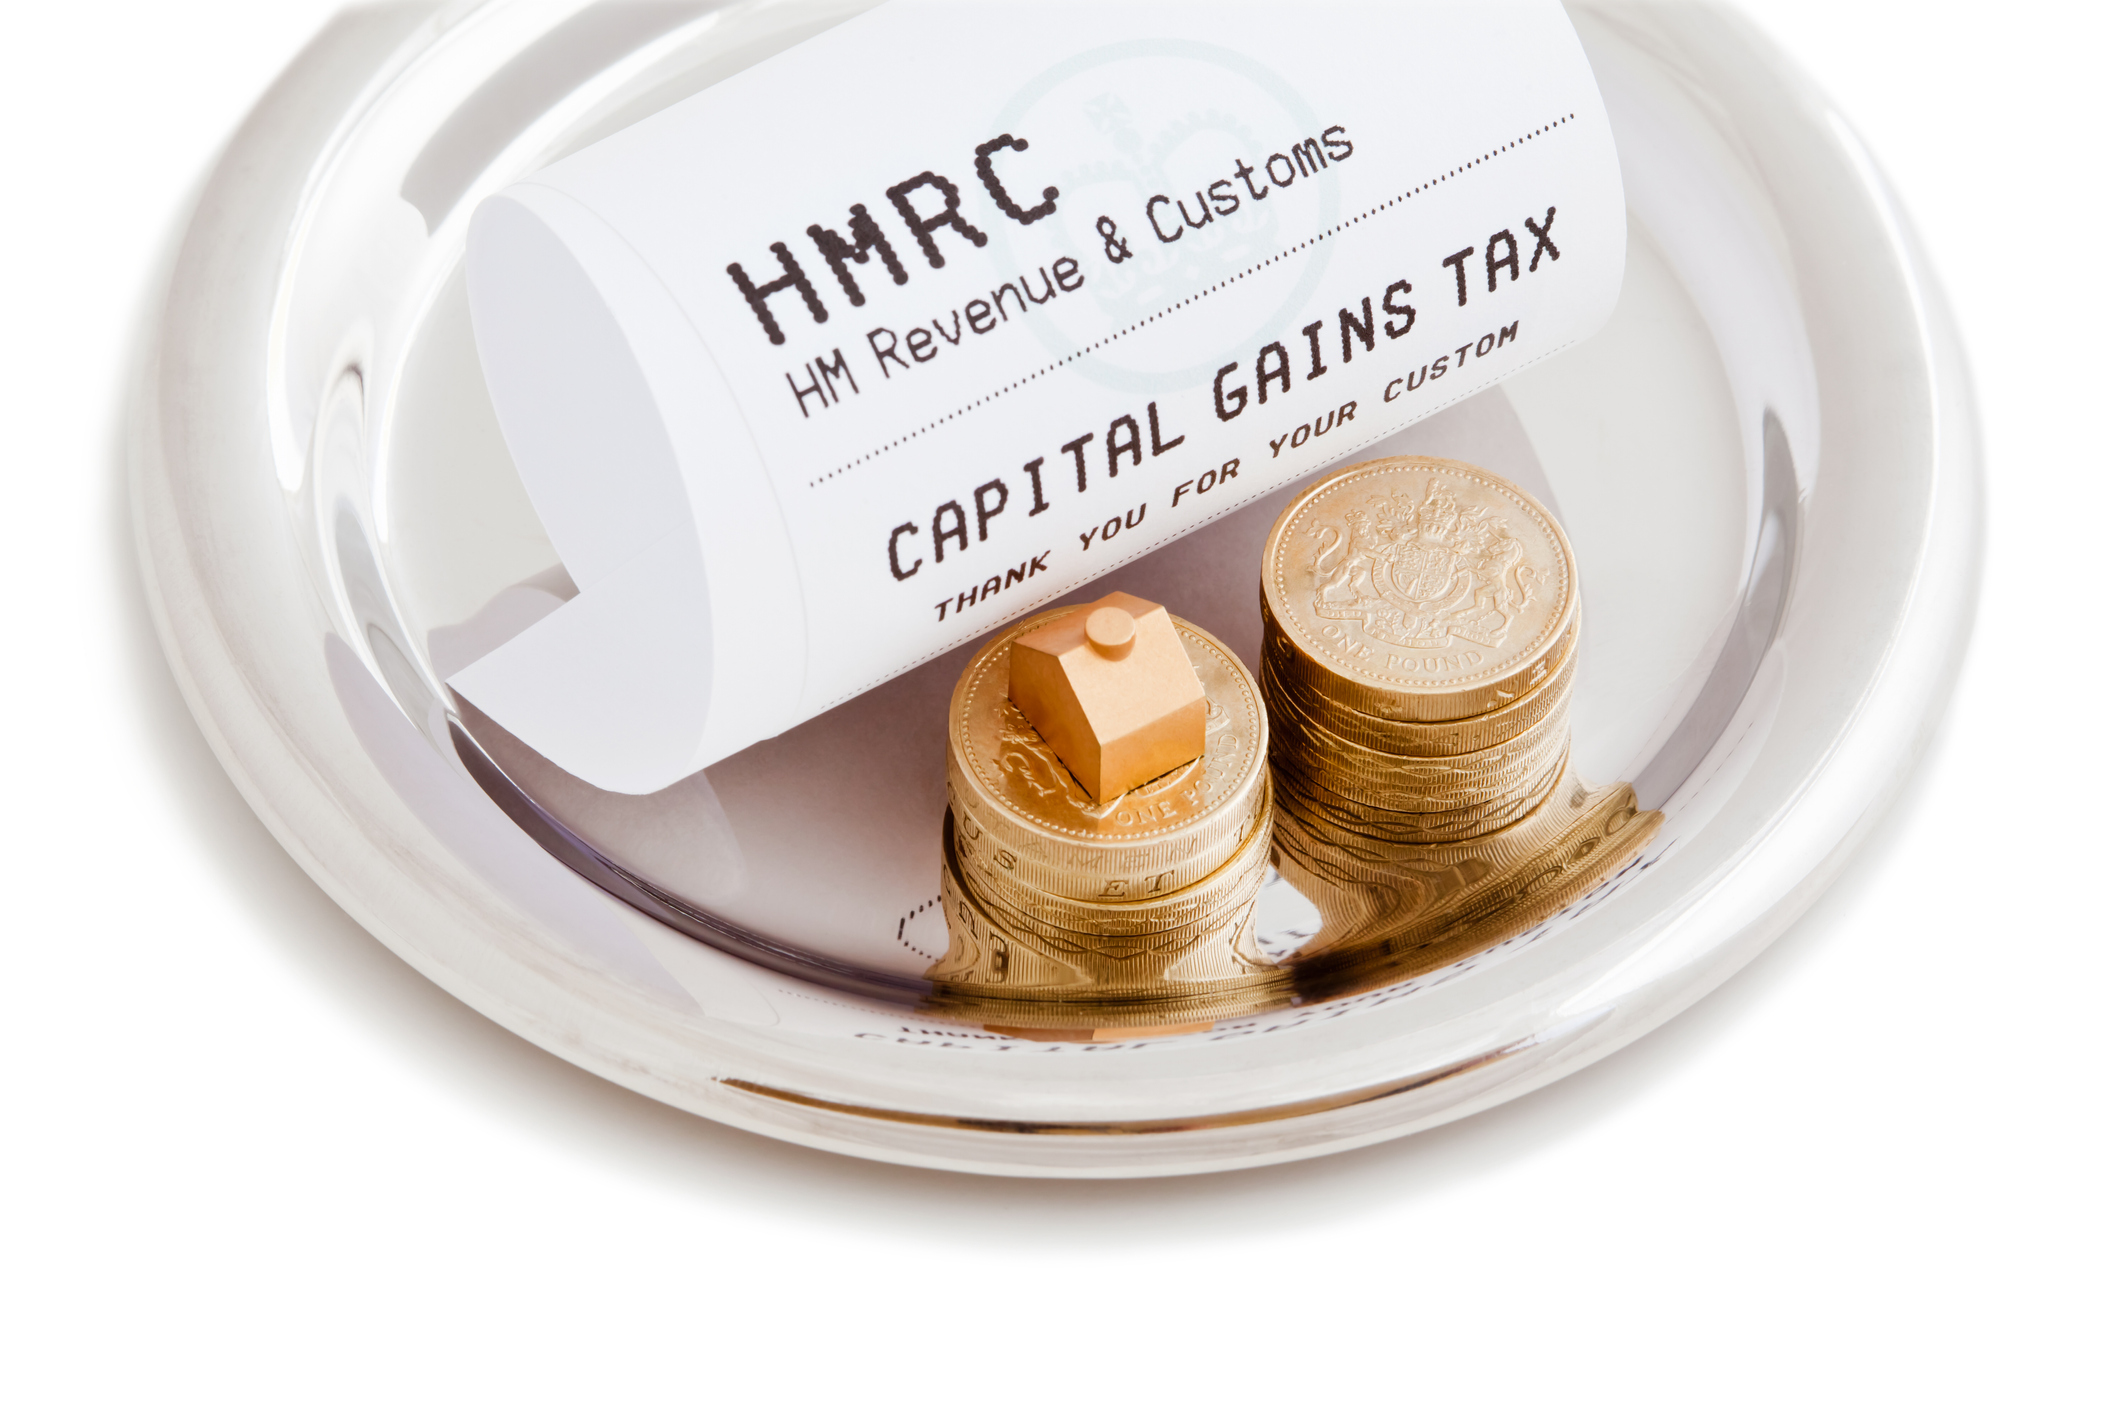 Capital gains tax: increases on the way?